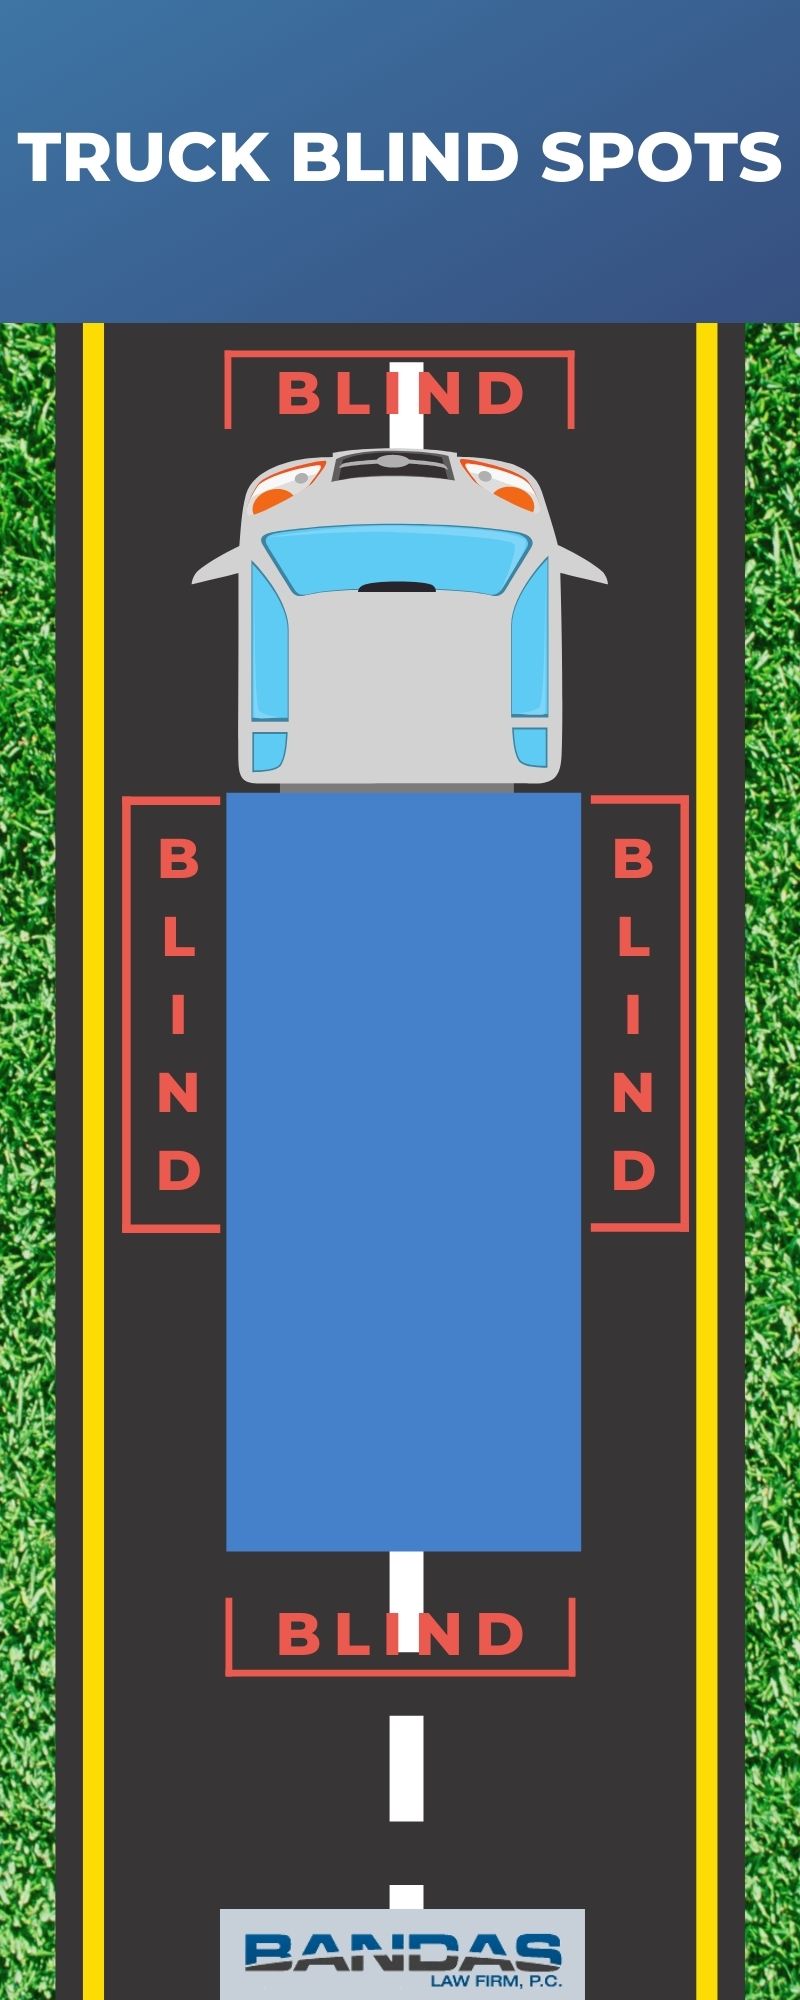 Truck Blind Spots Infographic 